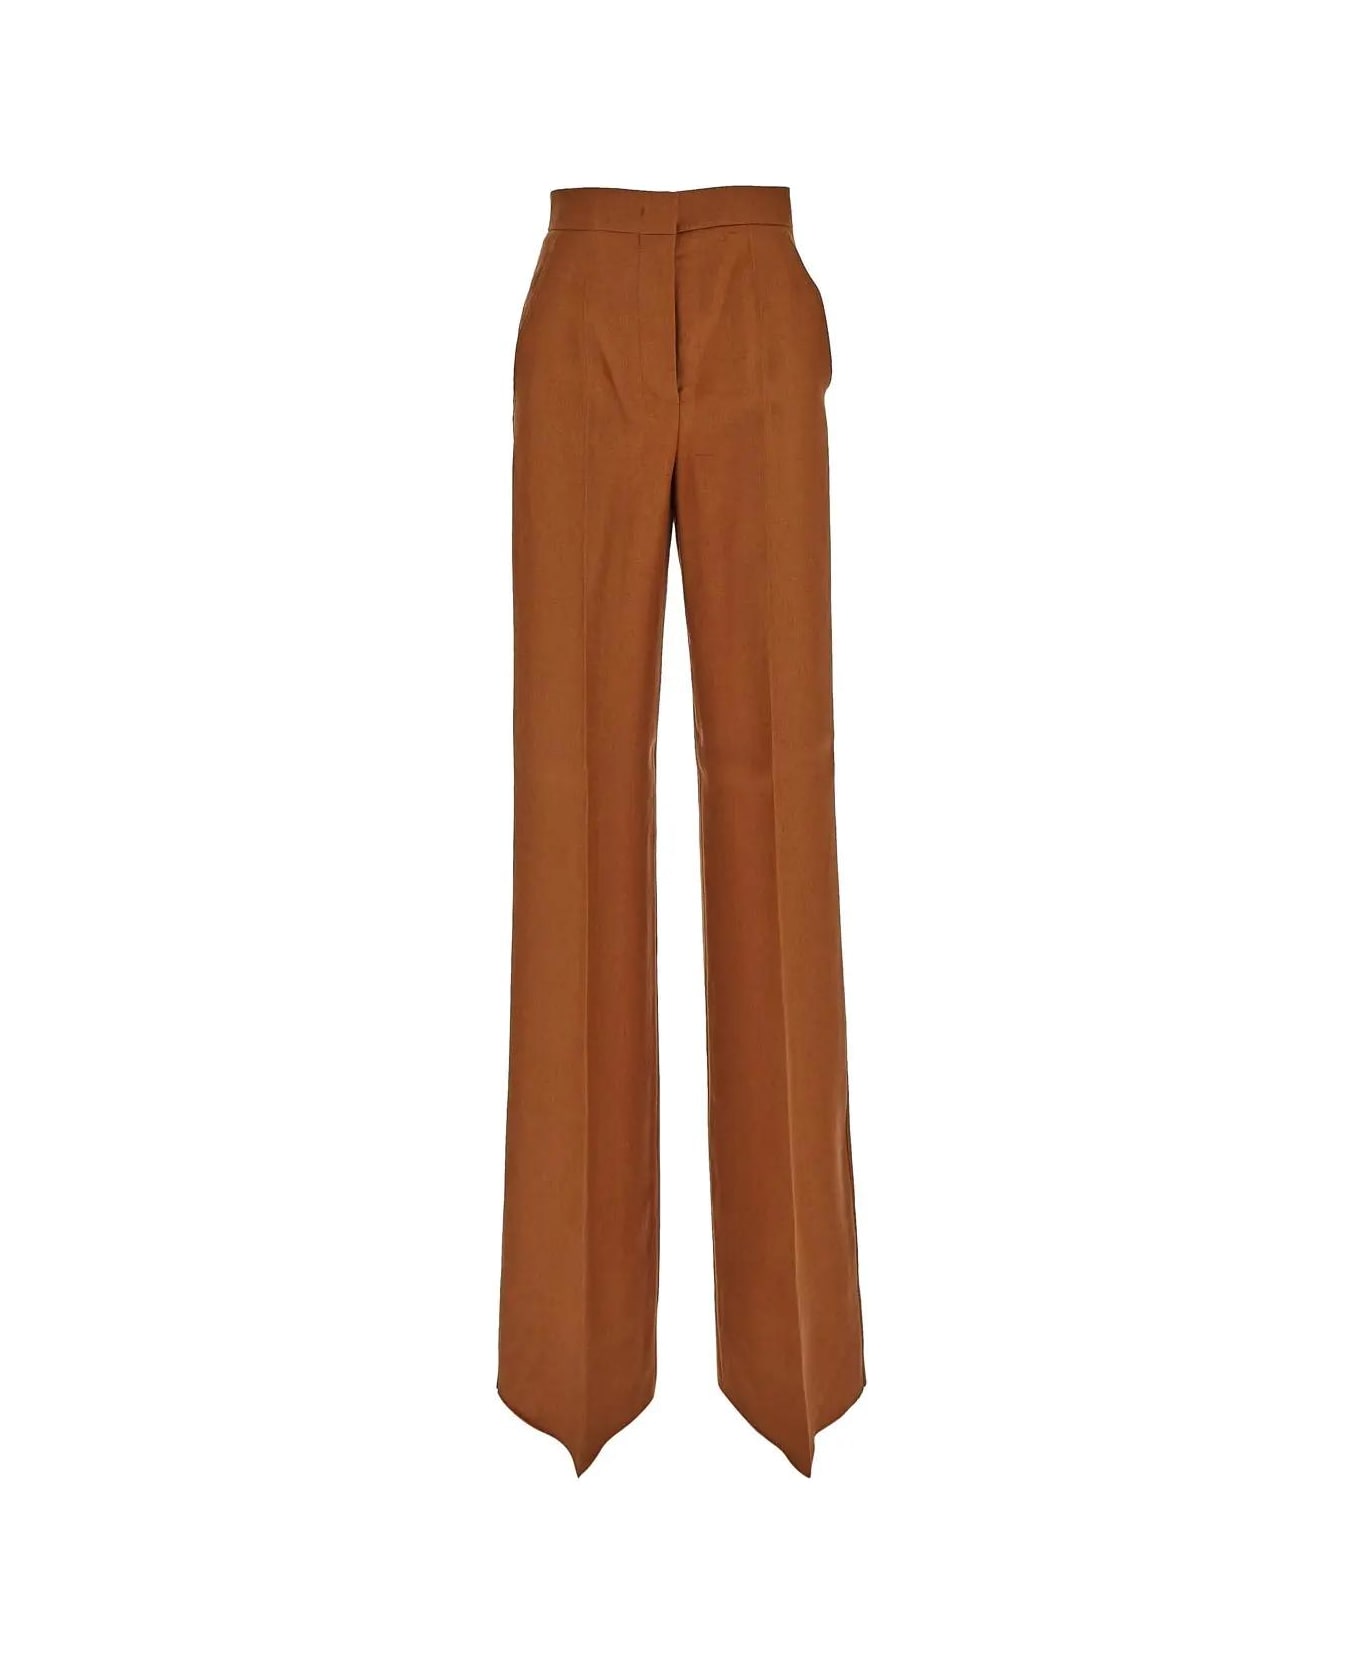 Max Mara Pleated Front Trousers - MARRONE ボトムス